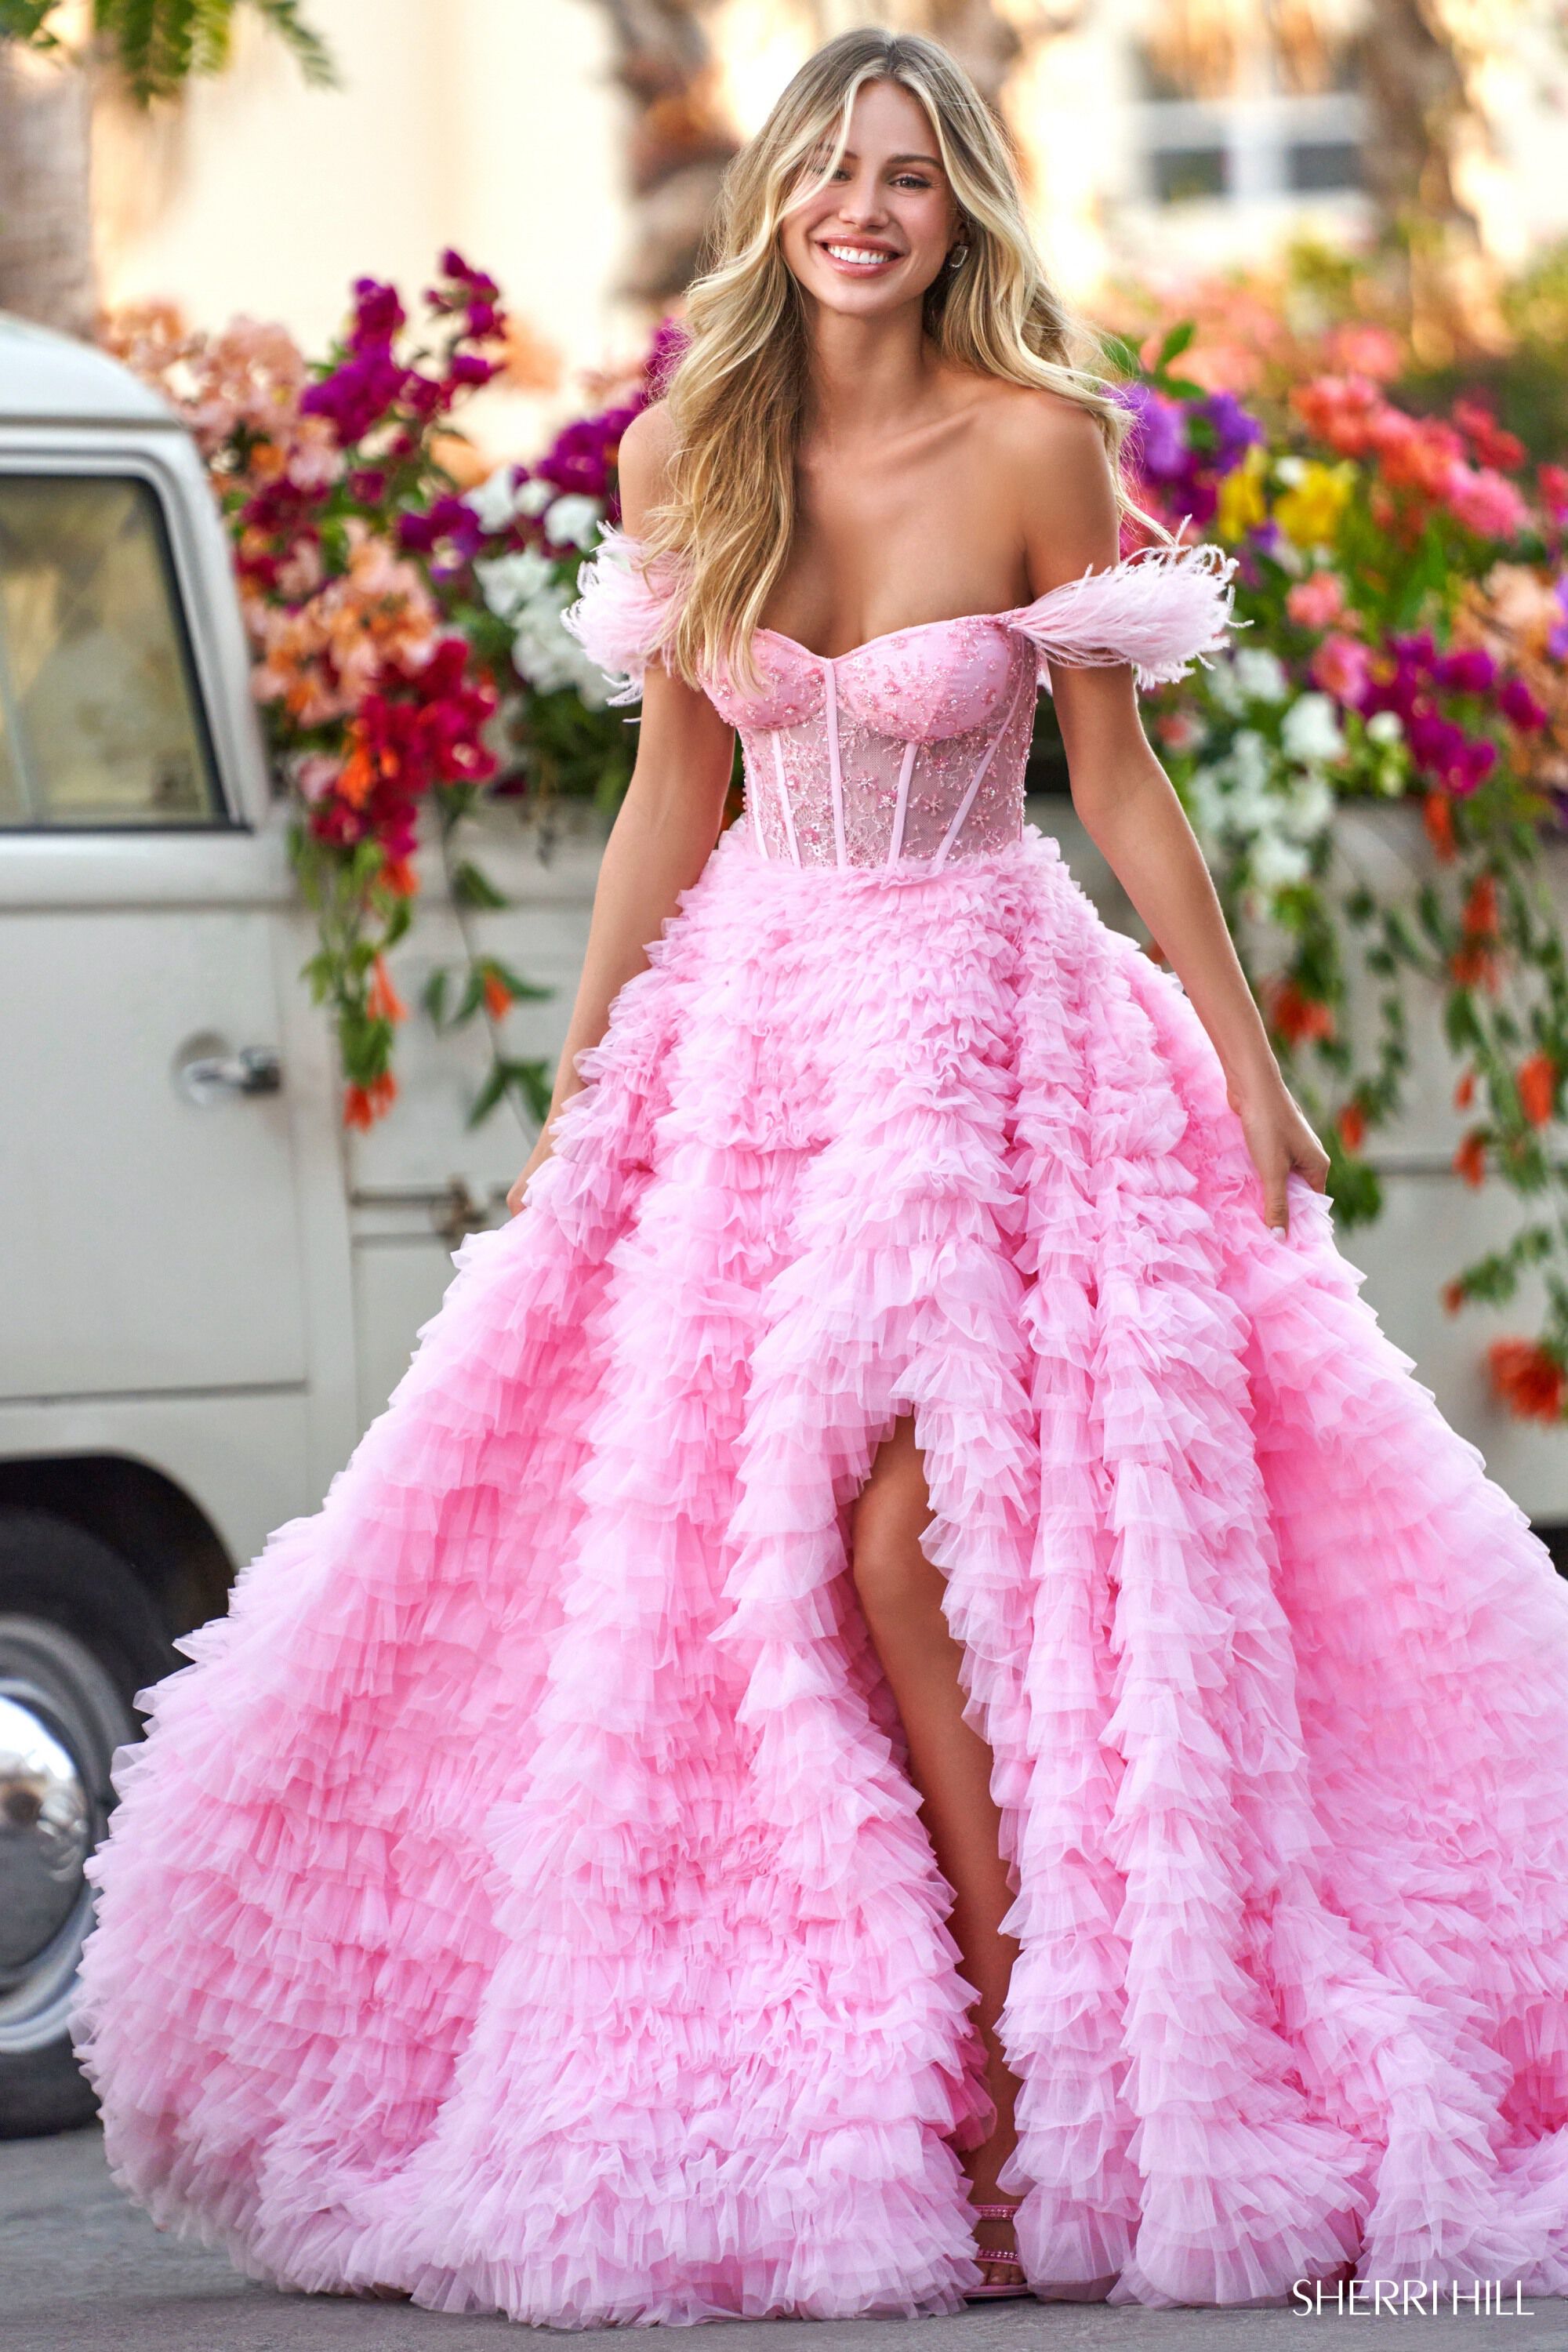 Top 10 pink prom dress ideas and inspiration